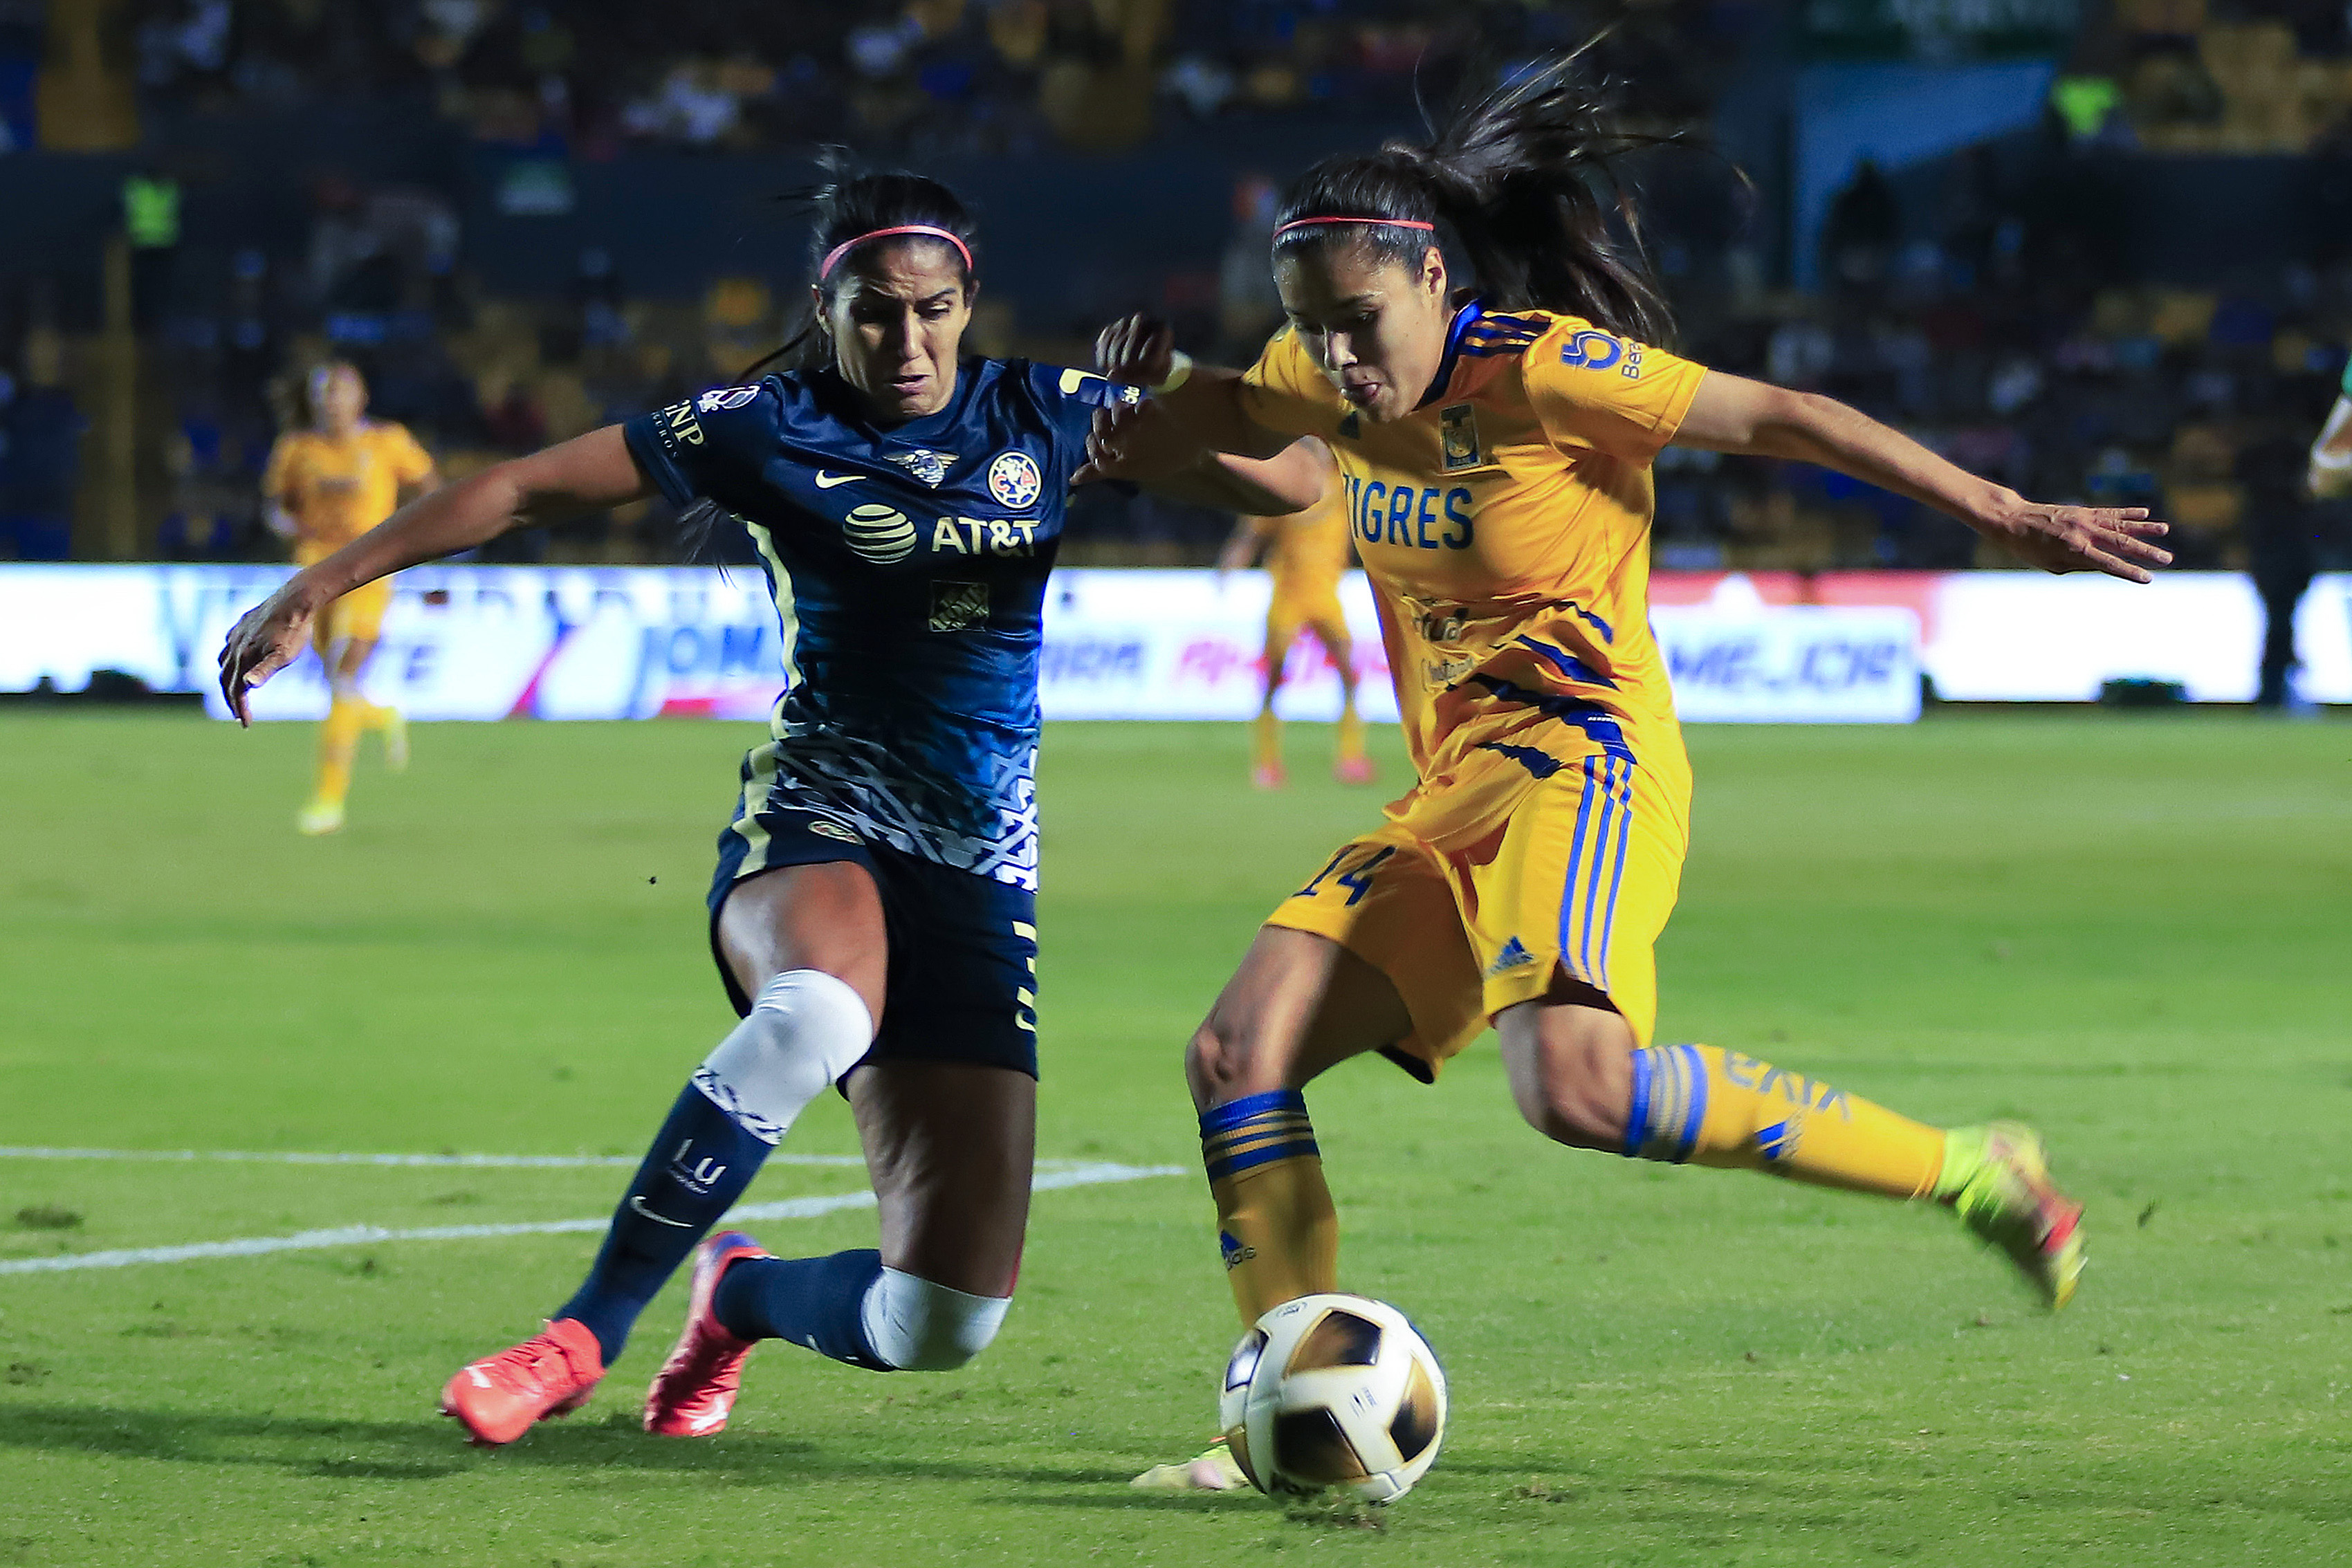 Selene Valera (L) of America fights for the ball with Jackie Ovalle (R) of Tigres during a Semifinal second leg match between Tigres and America as part of the Torneo Grita Mexico A21 Liga MX Femenil at Universitario Stadium on December 13, 2021 in Monterrey, Mexico.